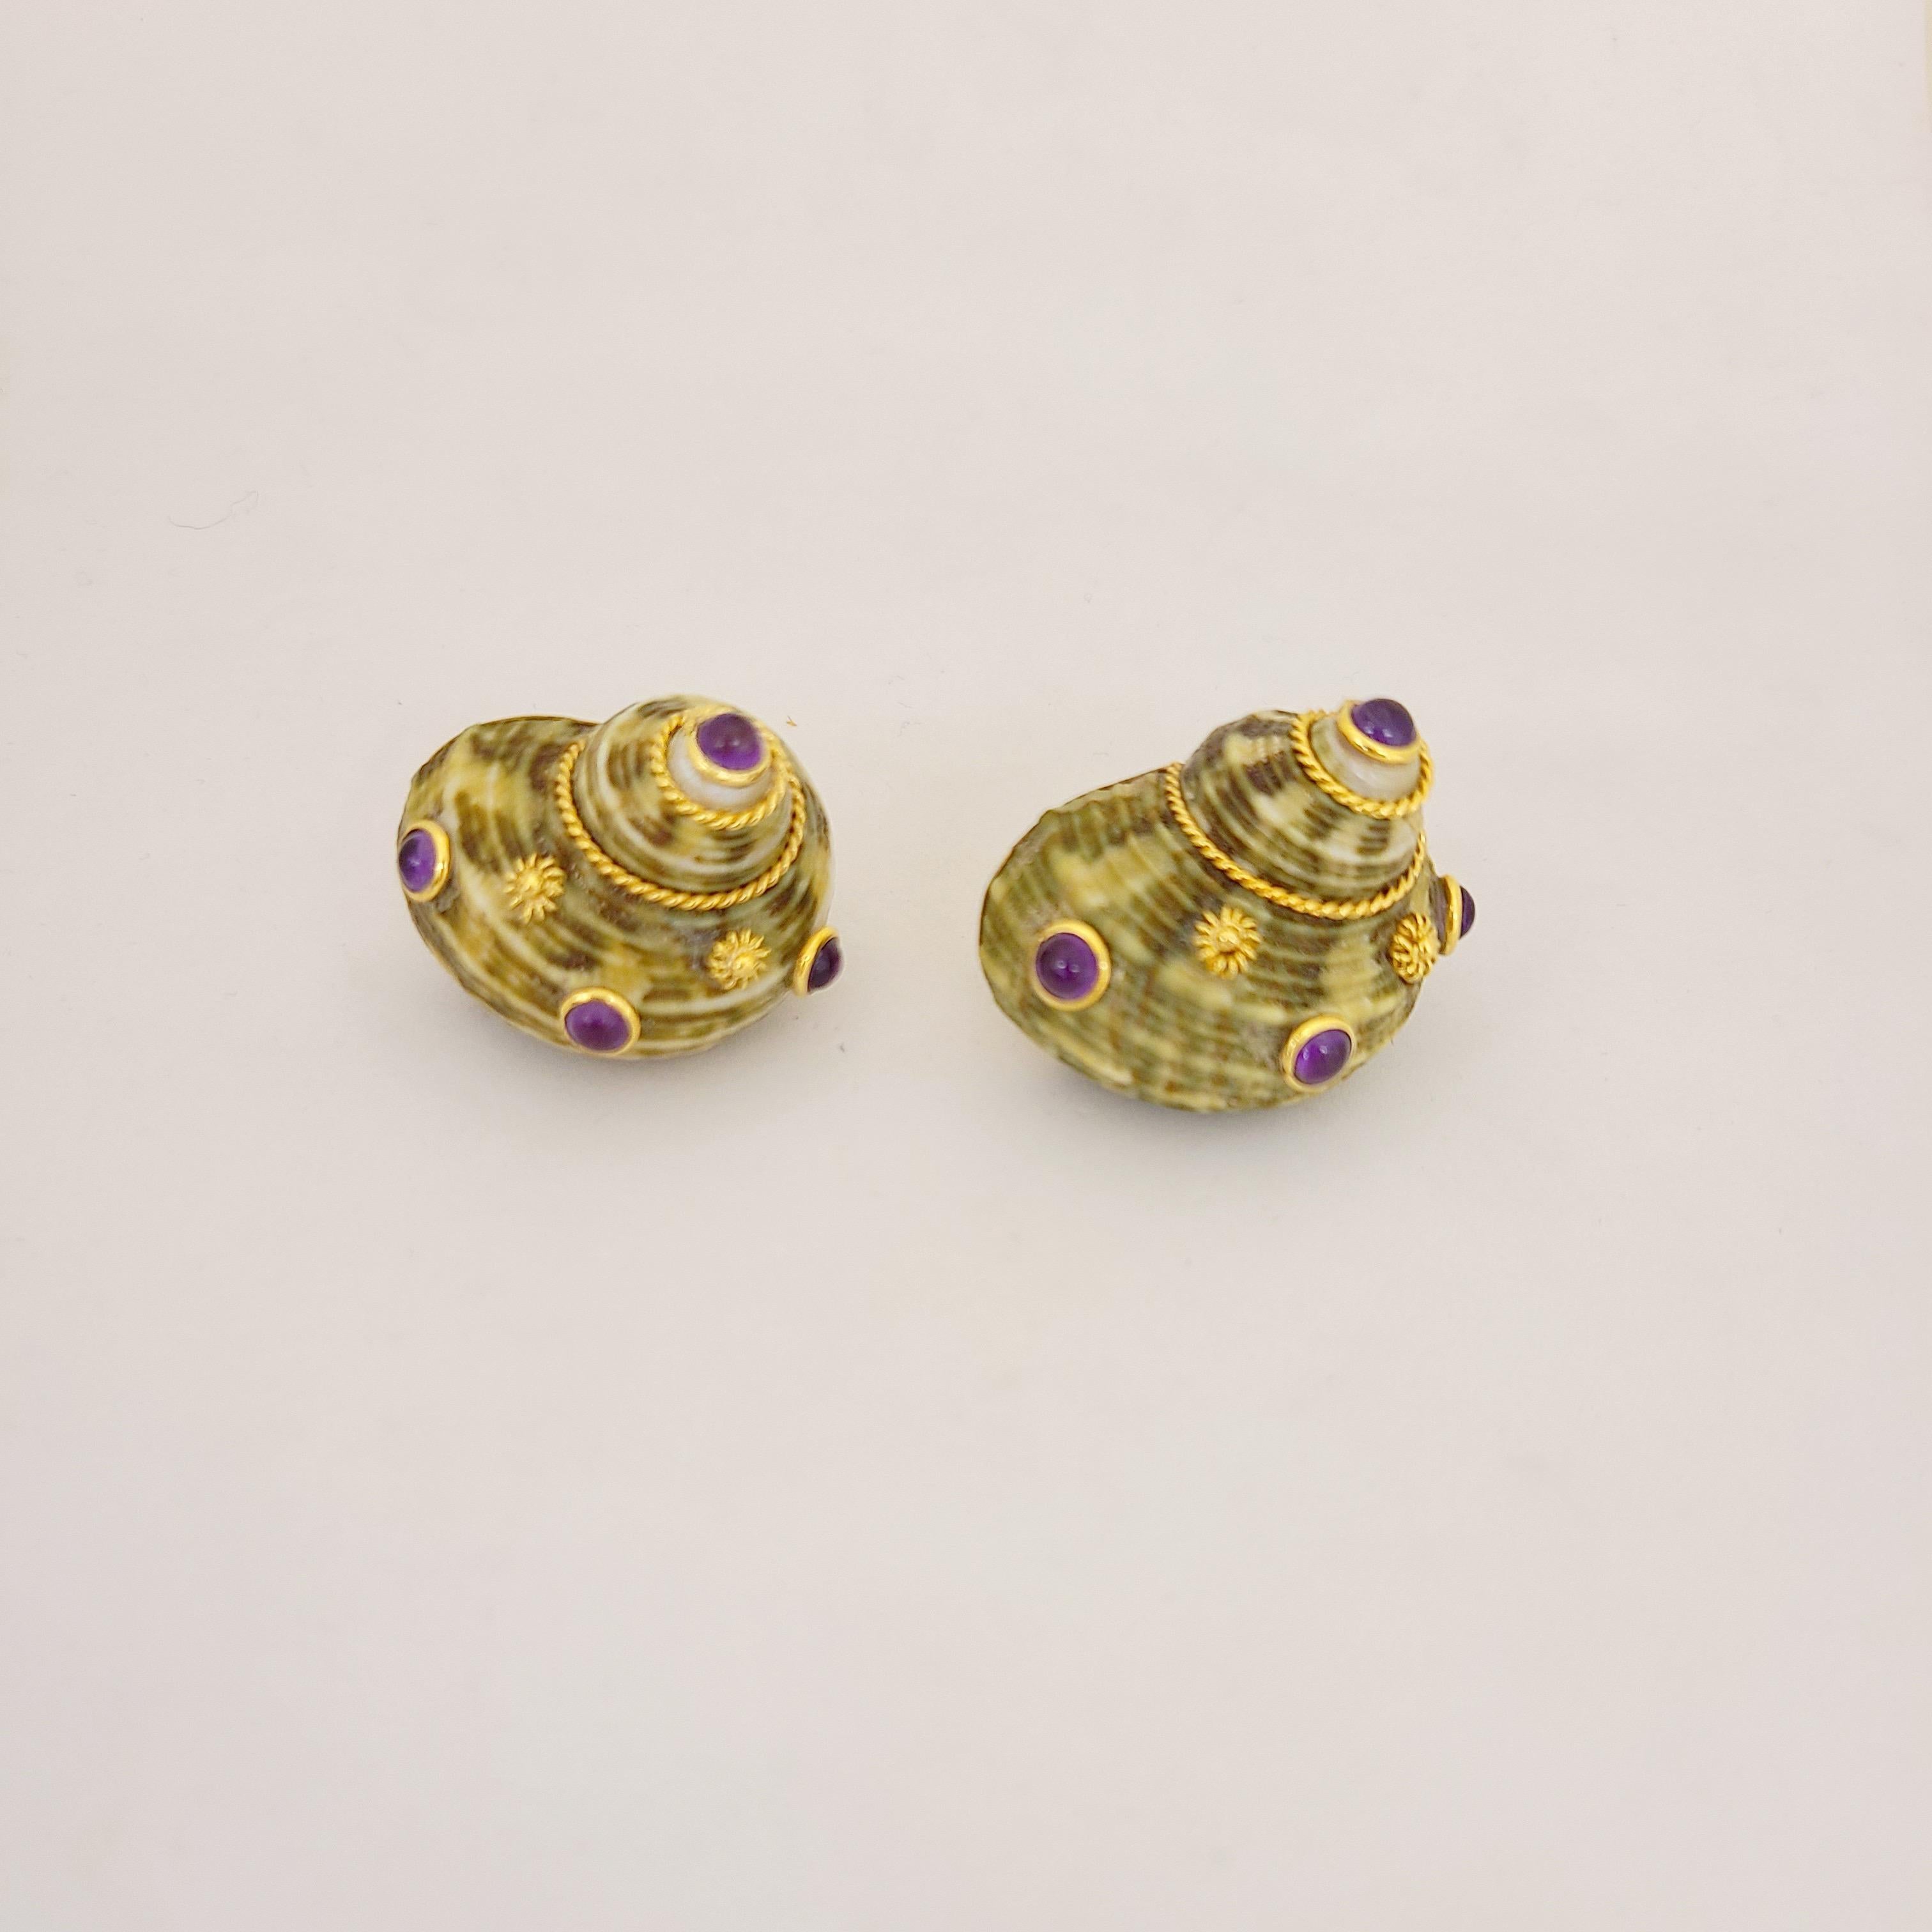 These 18 karat yellow gold earrings are designed with mountings that have been set with green seashells. The shells are decorated with bezel set cabochon amethysts, along with small gold flowers. The earrings have Omega backs, but posts can be added